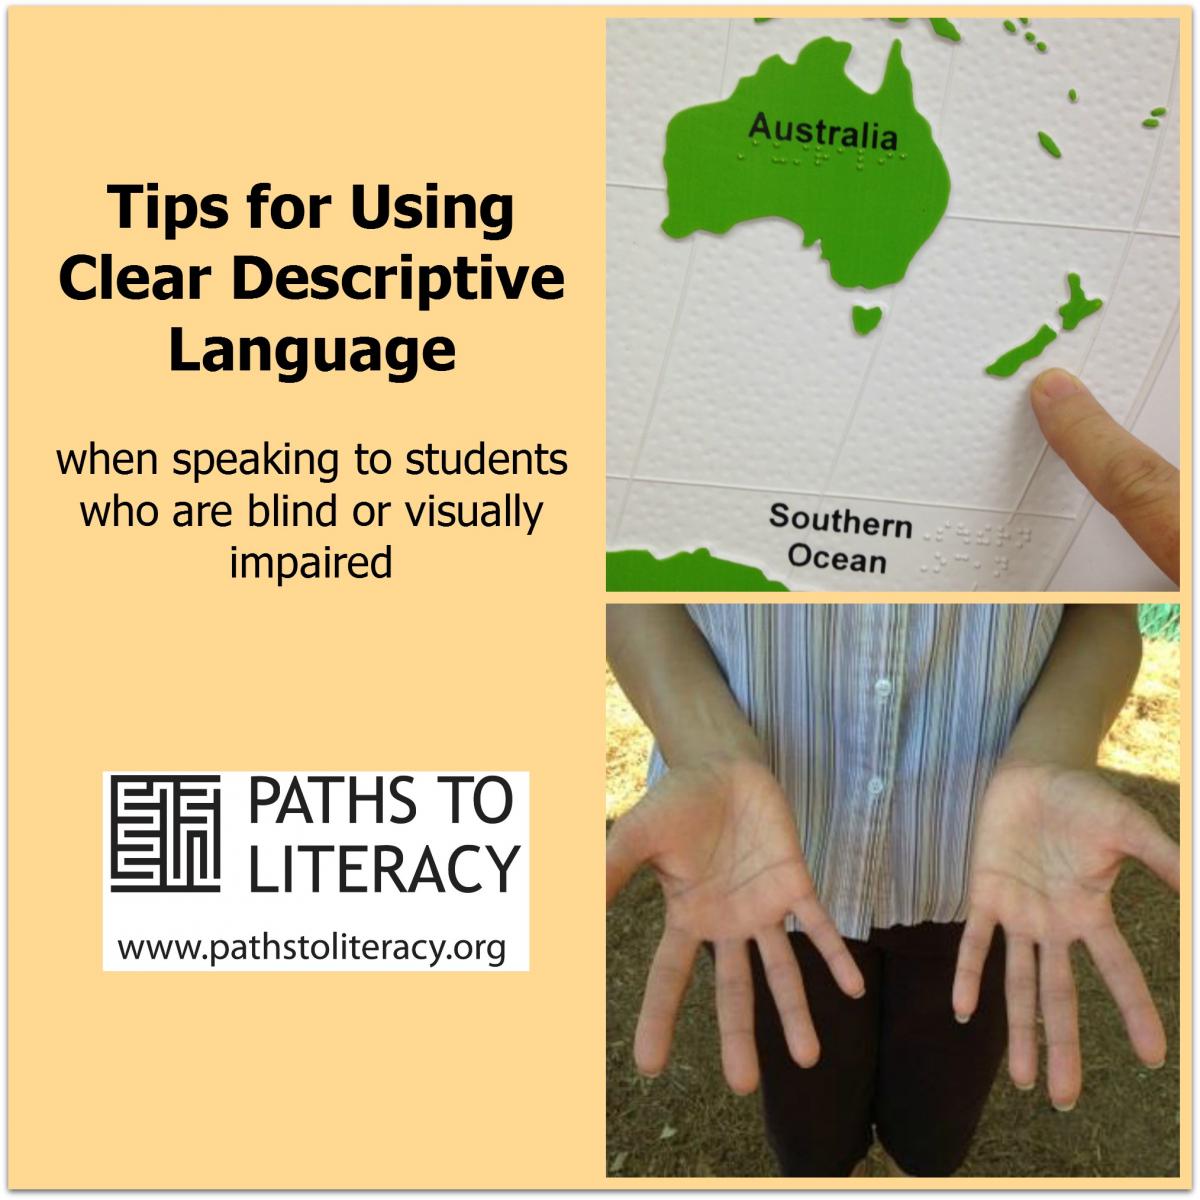 Tips for using clear descriptive language with students who are blind or visually impaired